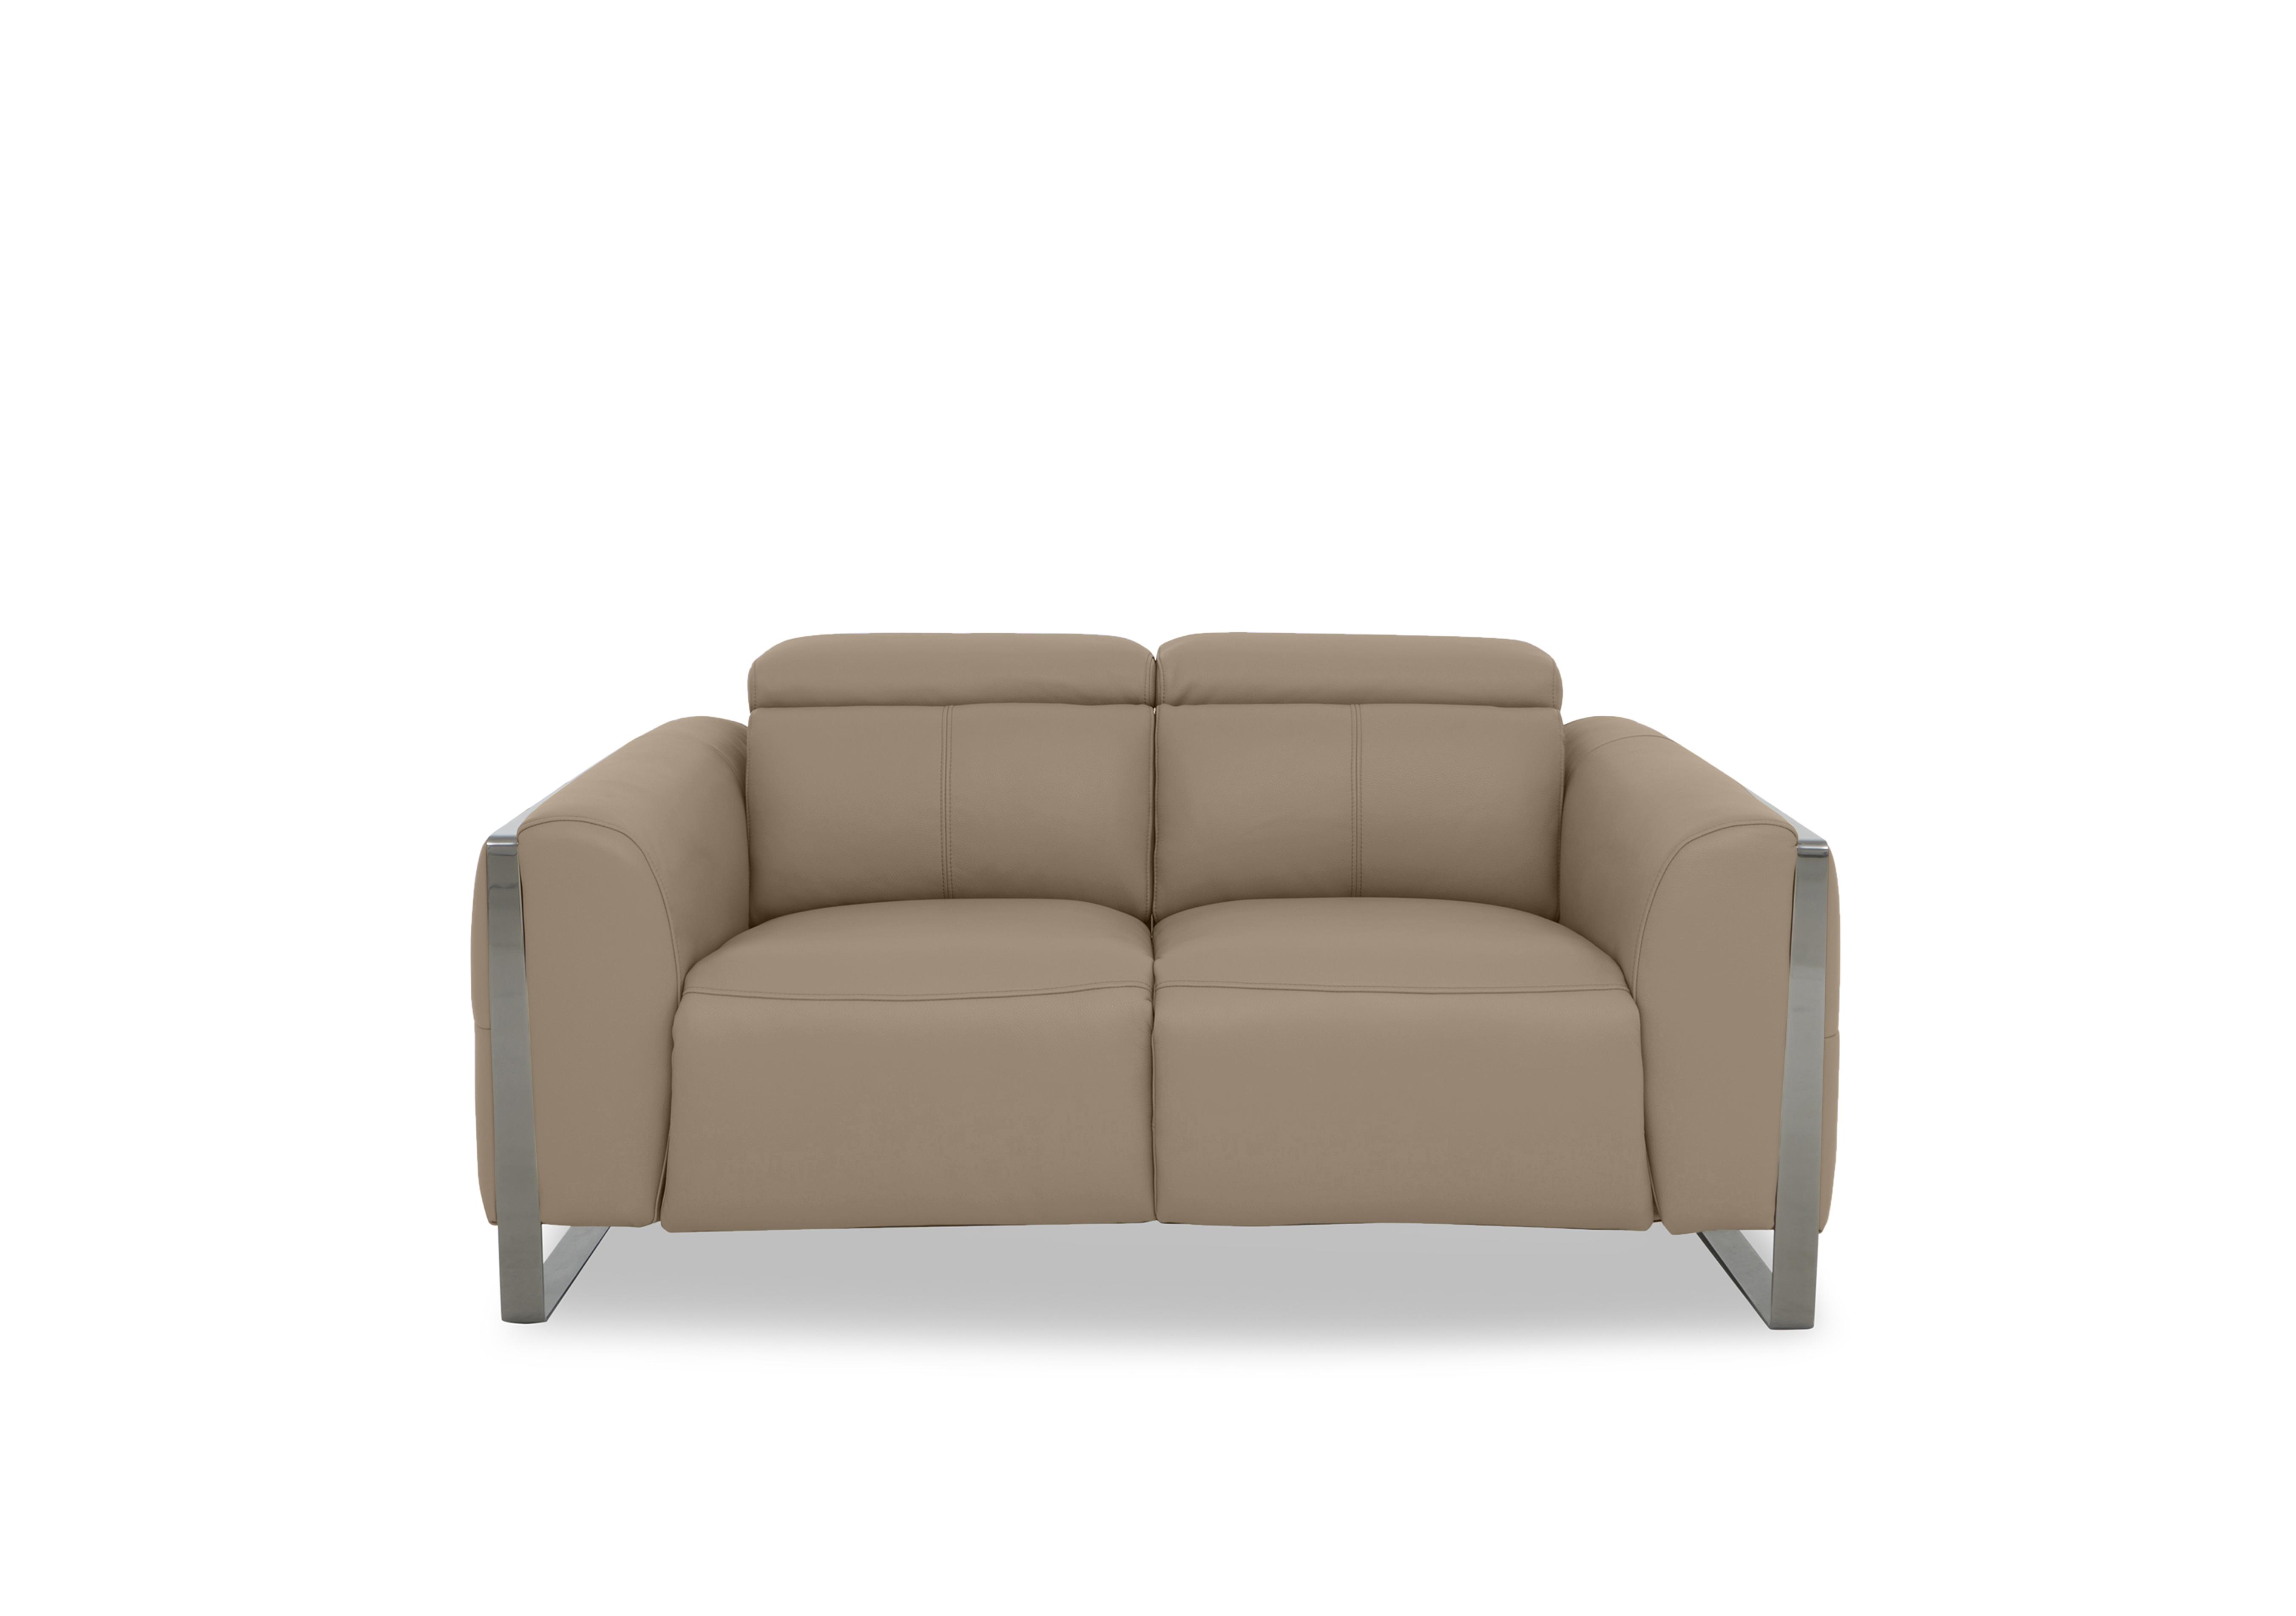 Gisella Leather 2 Seater Sofa in Cat-60/06 Barley on Furniture Village